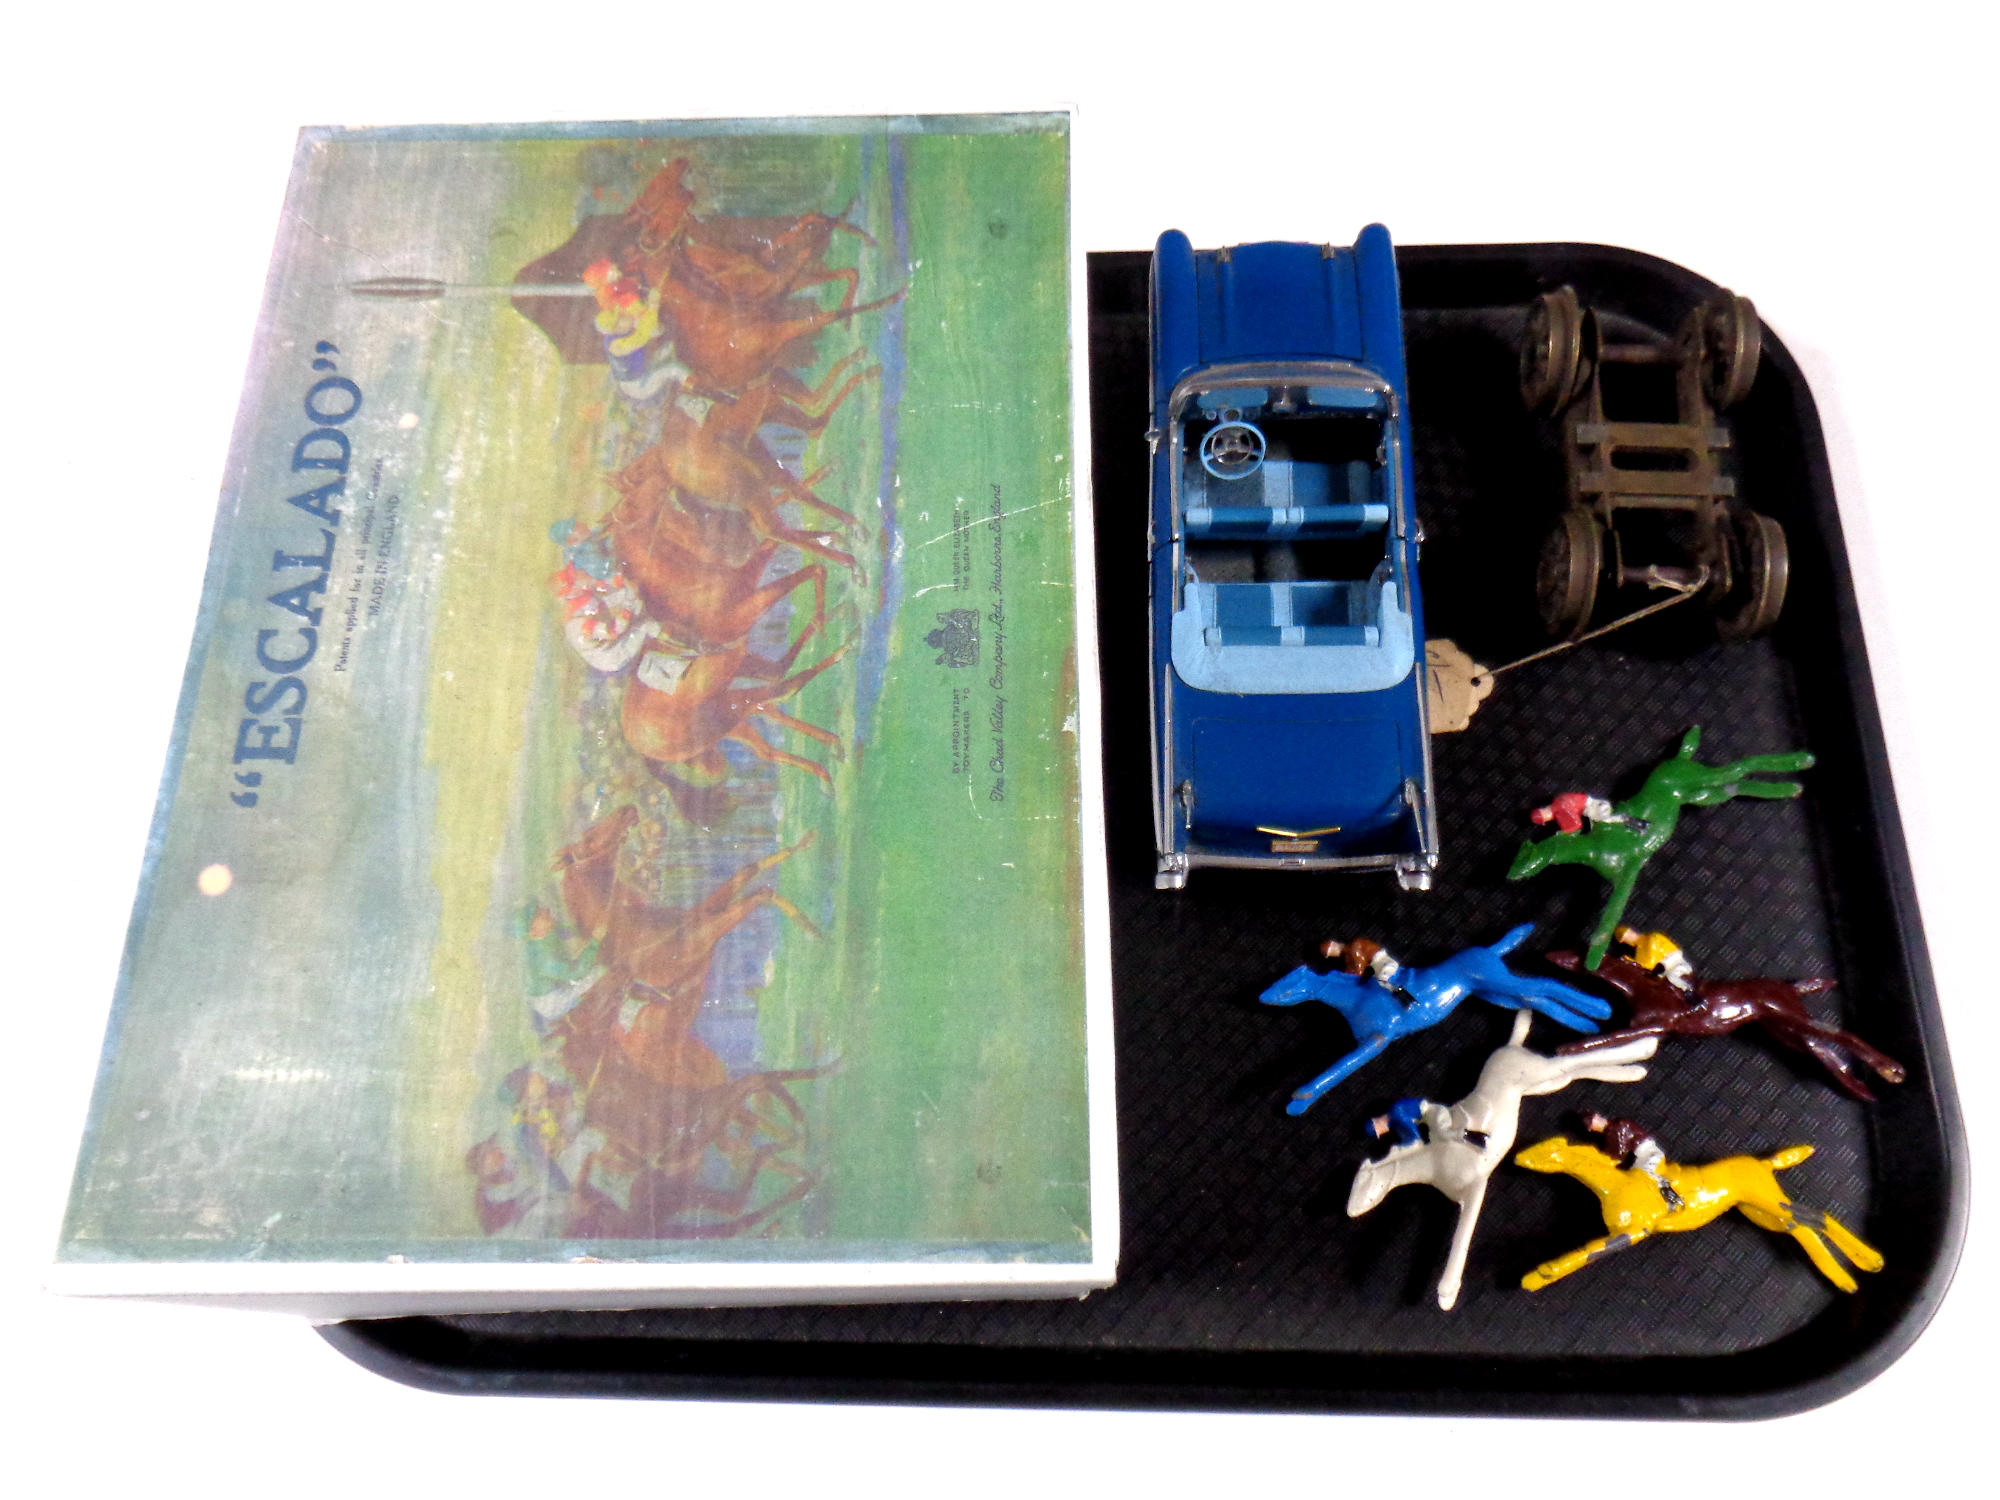 A tray containing a boxed Chad Valley Escalado together with a Danbury Mint die cast car and a set